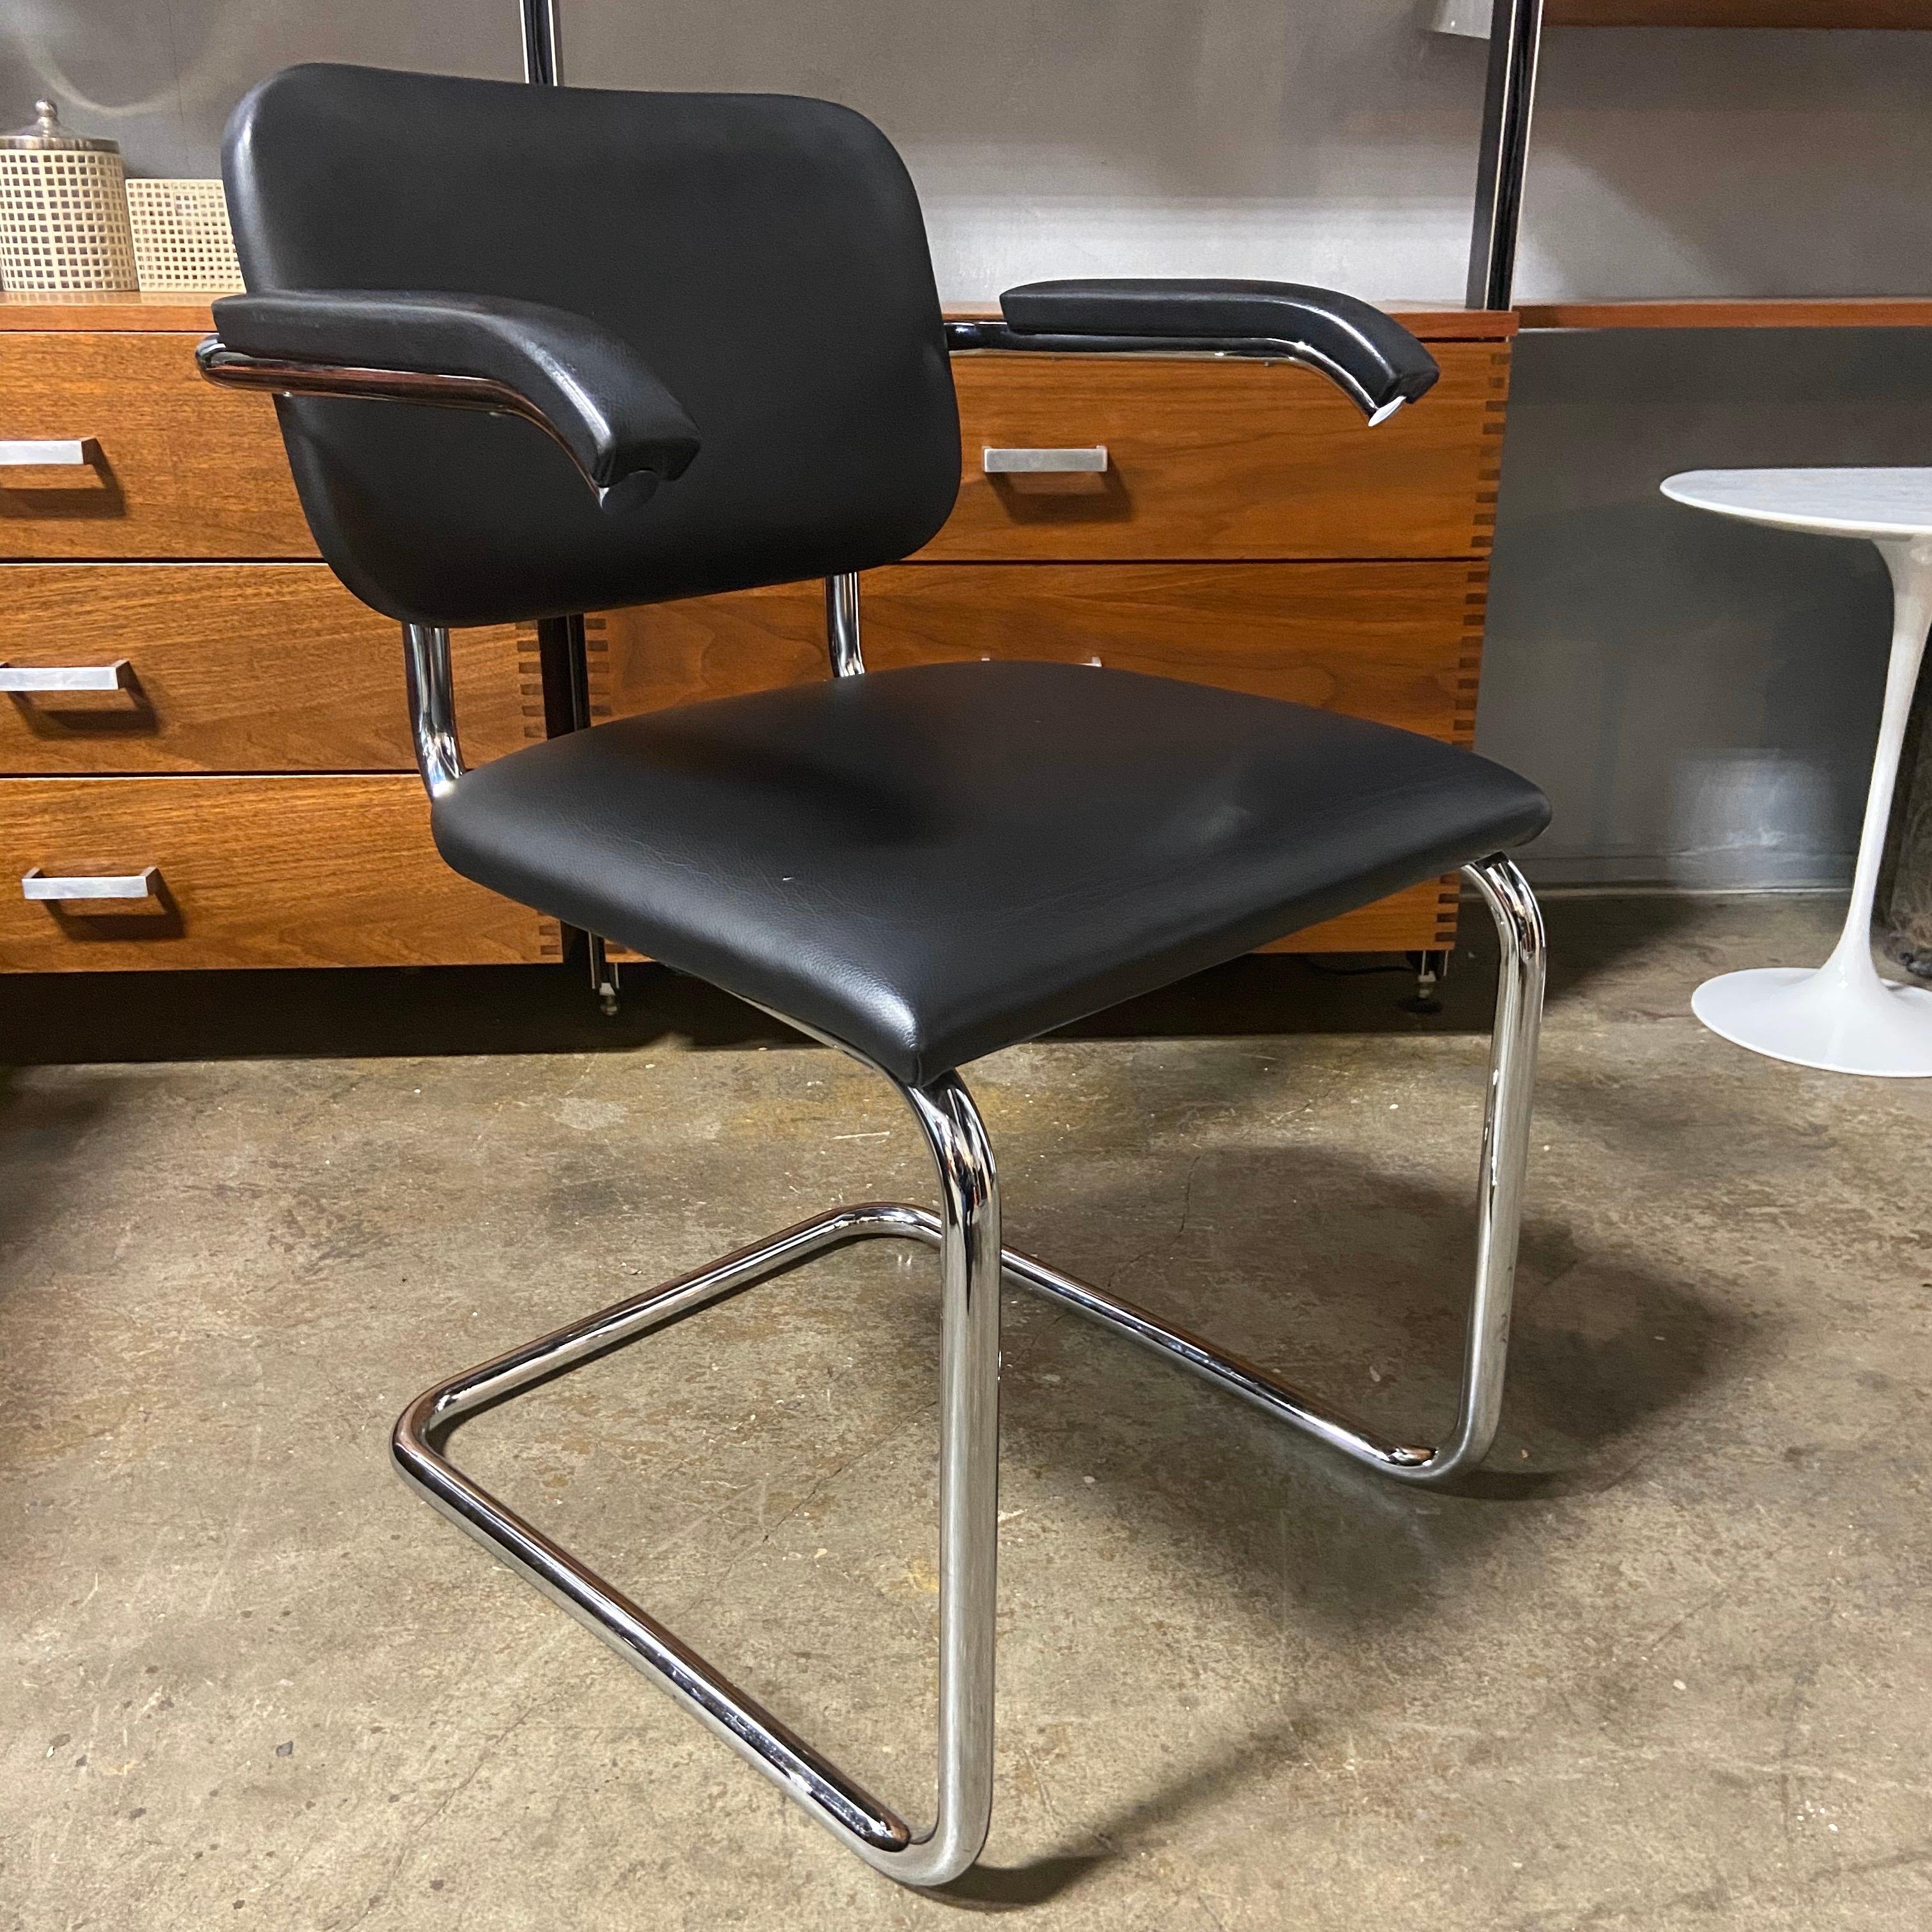 For your consideration are these wonderful Cesca chairs in striking black leather with shiny heavy chrome. Perfect for the home or office and ready for use showing little if any wear. All are branded with the Knoll logo and Marcel Breuer signature.